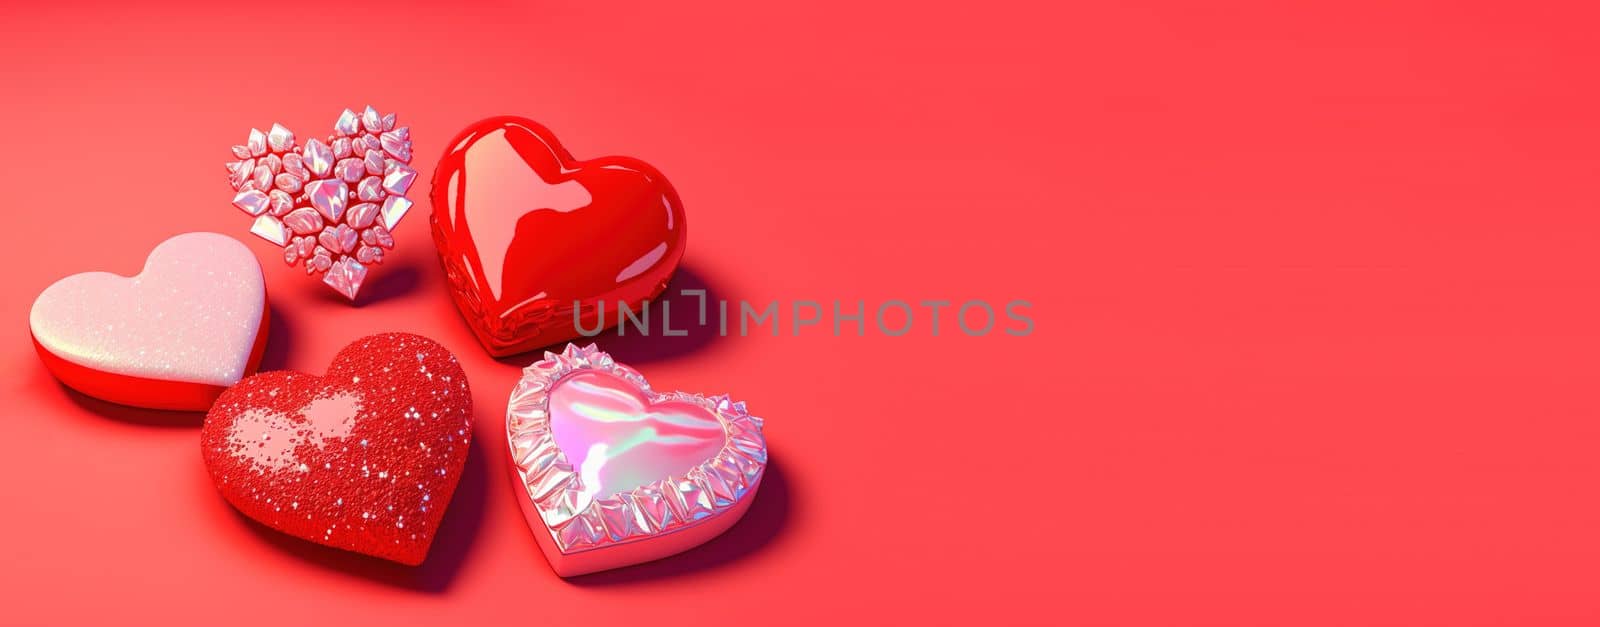 Valentine's Day Crystal Diamond Heart 3D Illustration for Banner and Background by templator